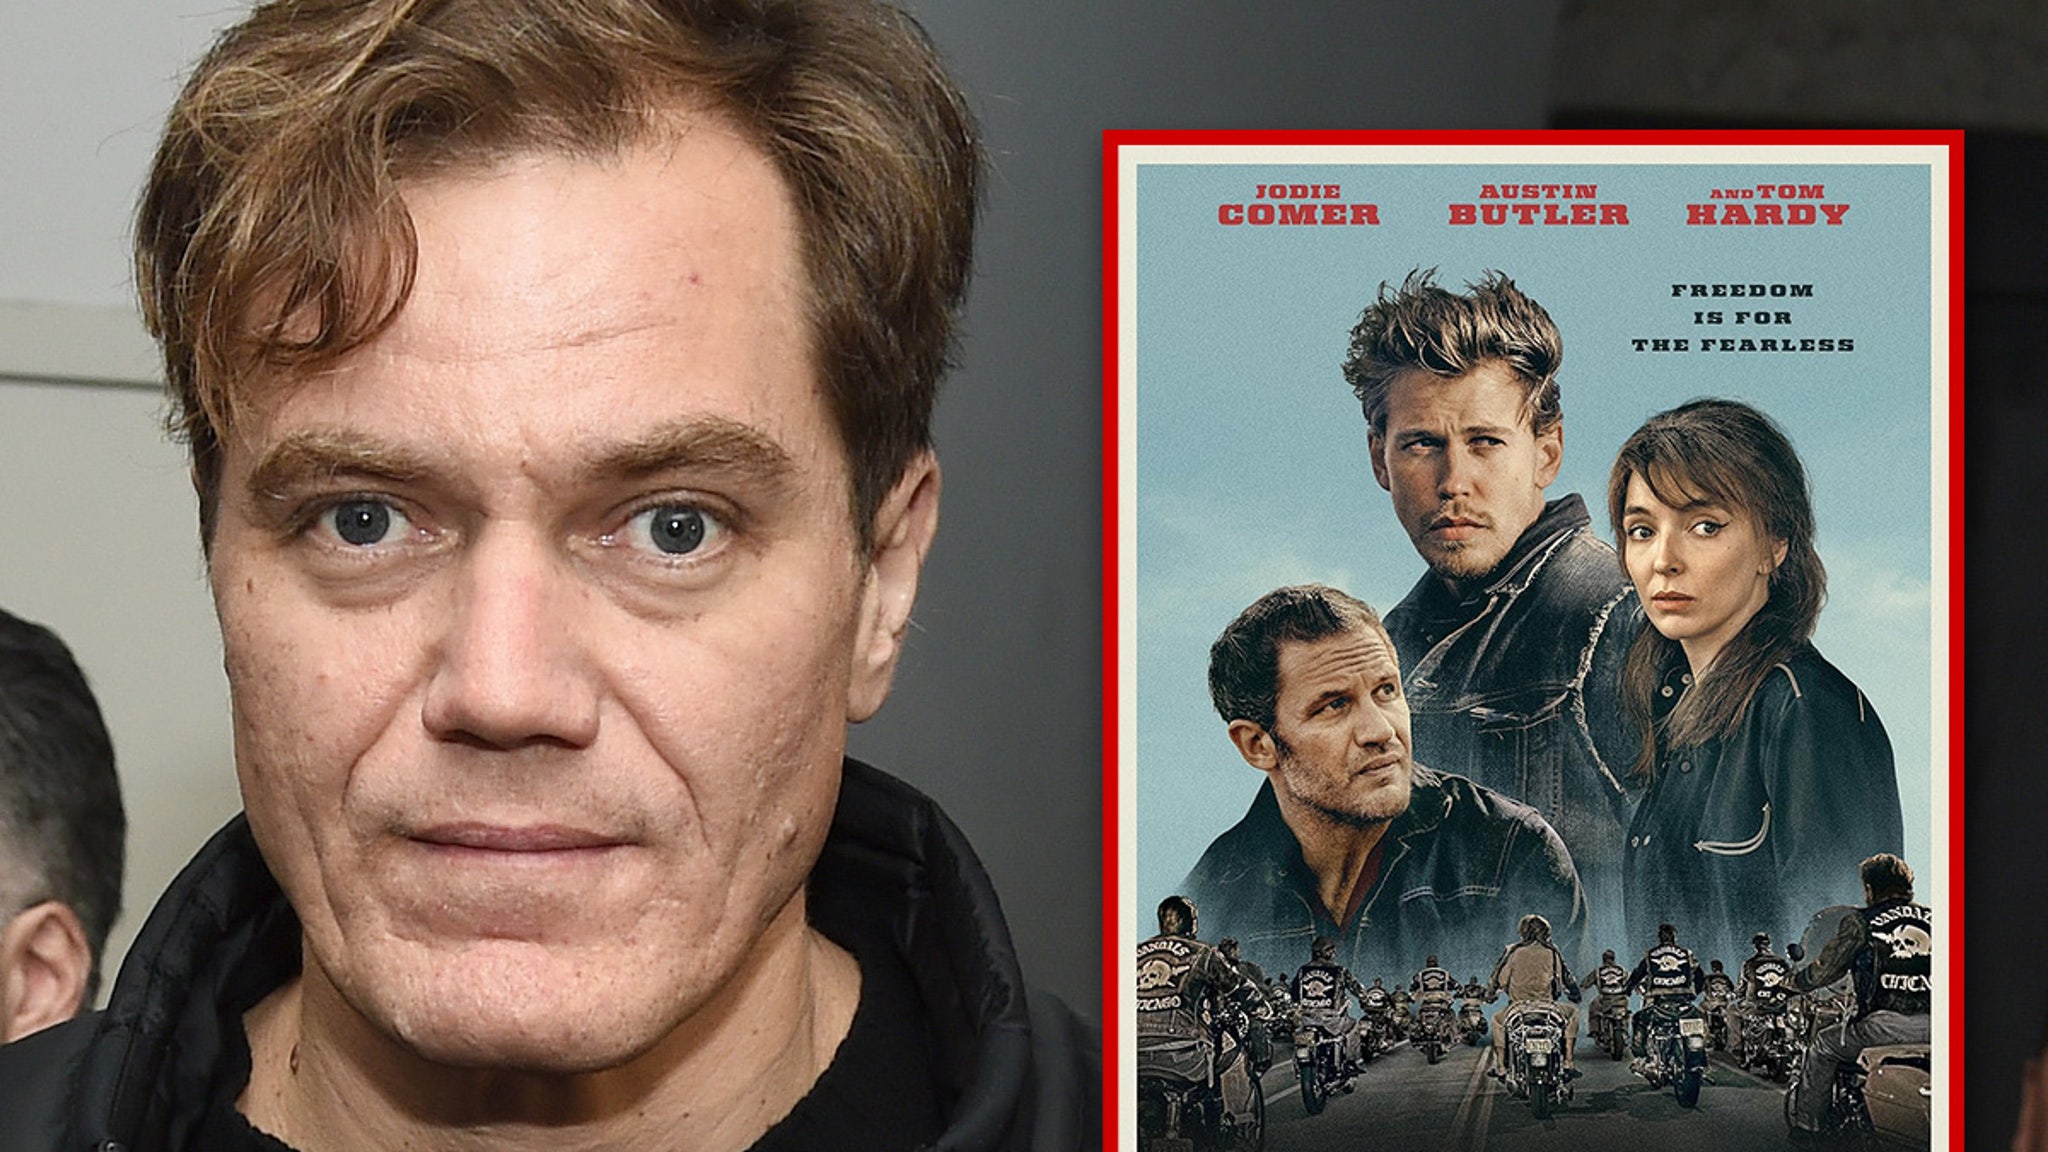 Michael Shannon Wasn't Allowed Near a Motorcycle on 'Bikeriders' Set, Director Says